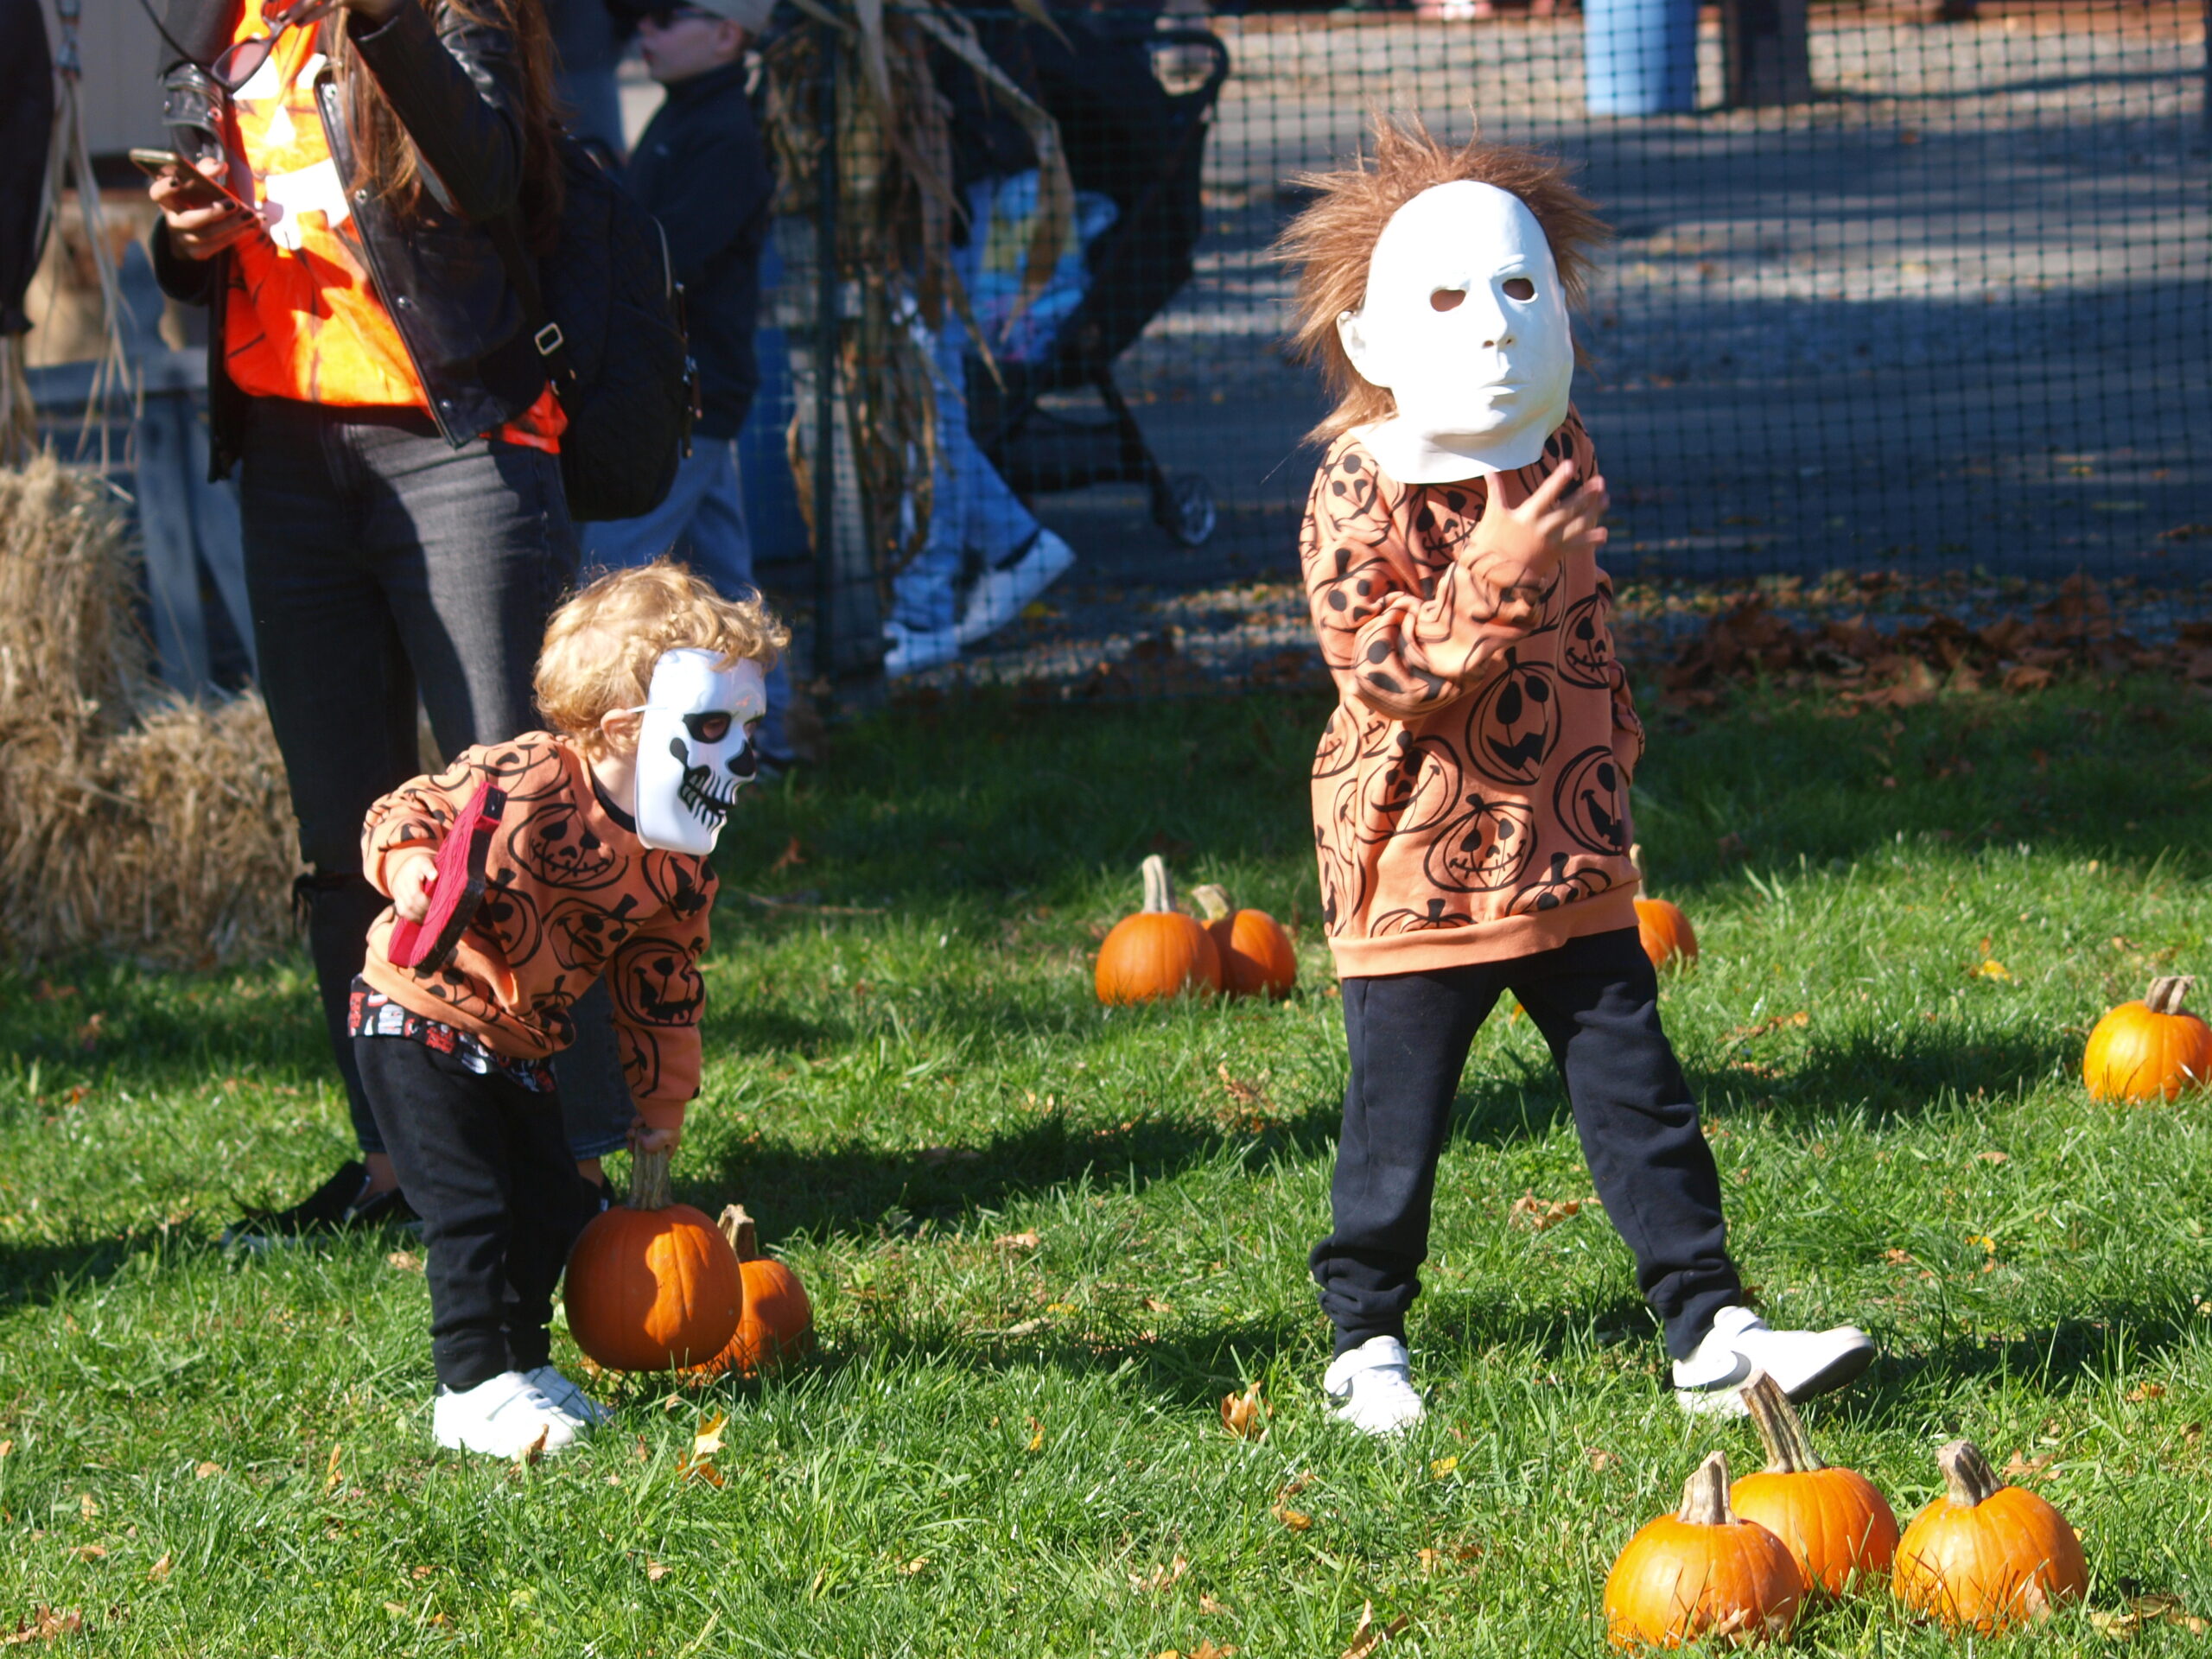 Join in the Halloween fun at the Whippany Railway Museum onboard "The Pumpkin Patch Train" !